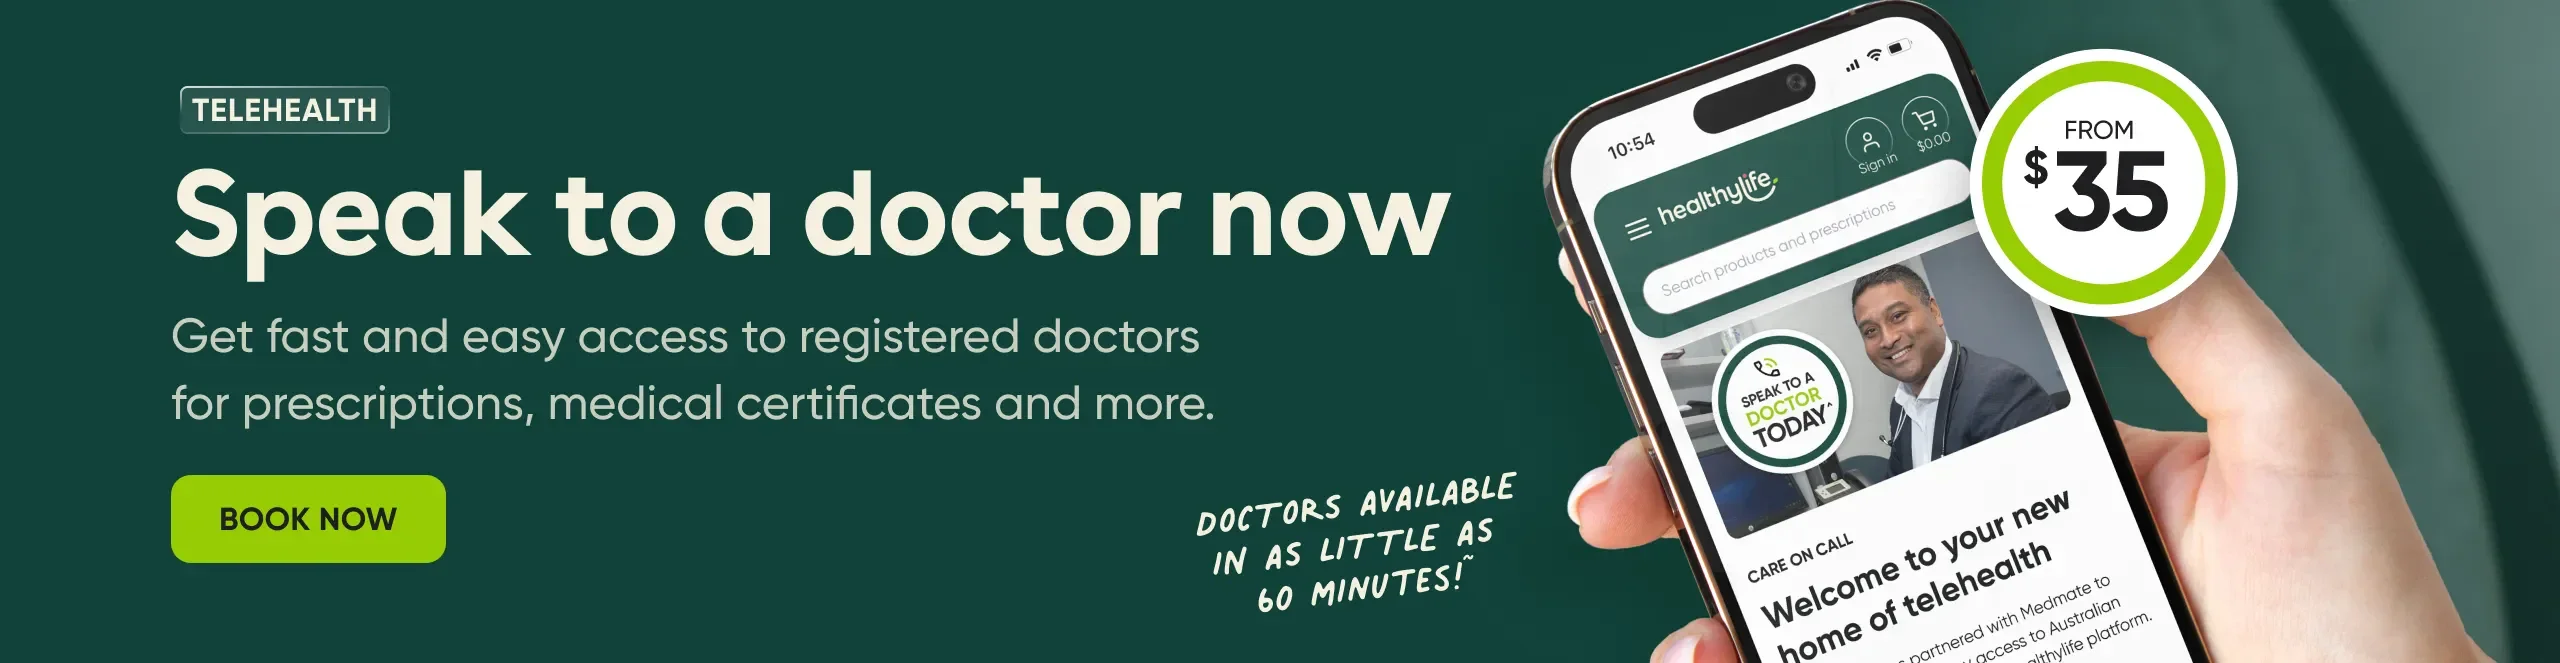 Telehealth - Speak to a doctor now. Get fast and easy access registered doctors for prescriptions, medical certificates and more. Doctors available in as little as 60 minutes!~